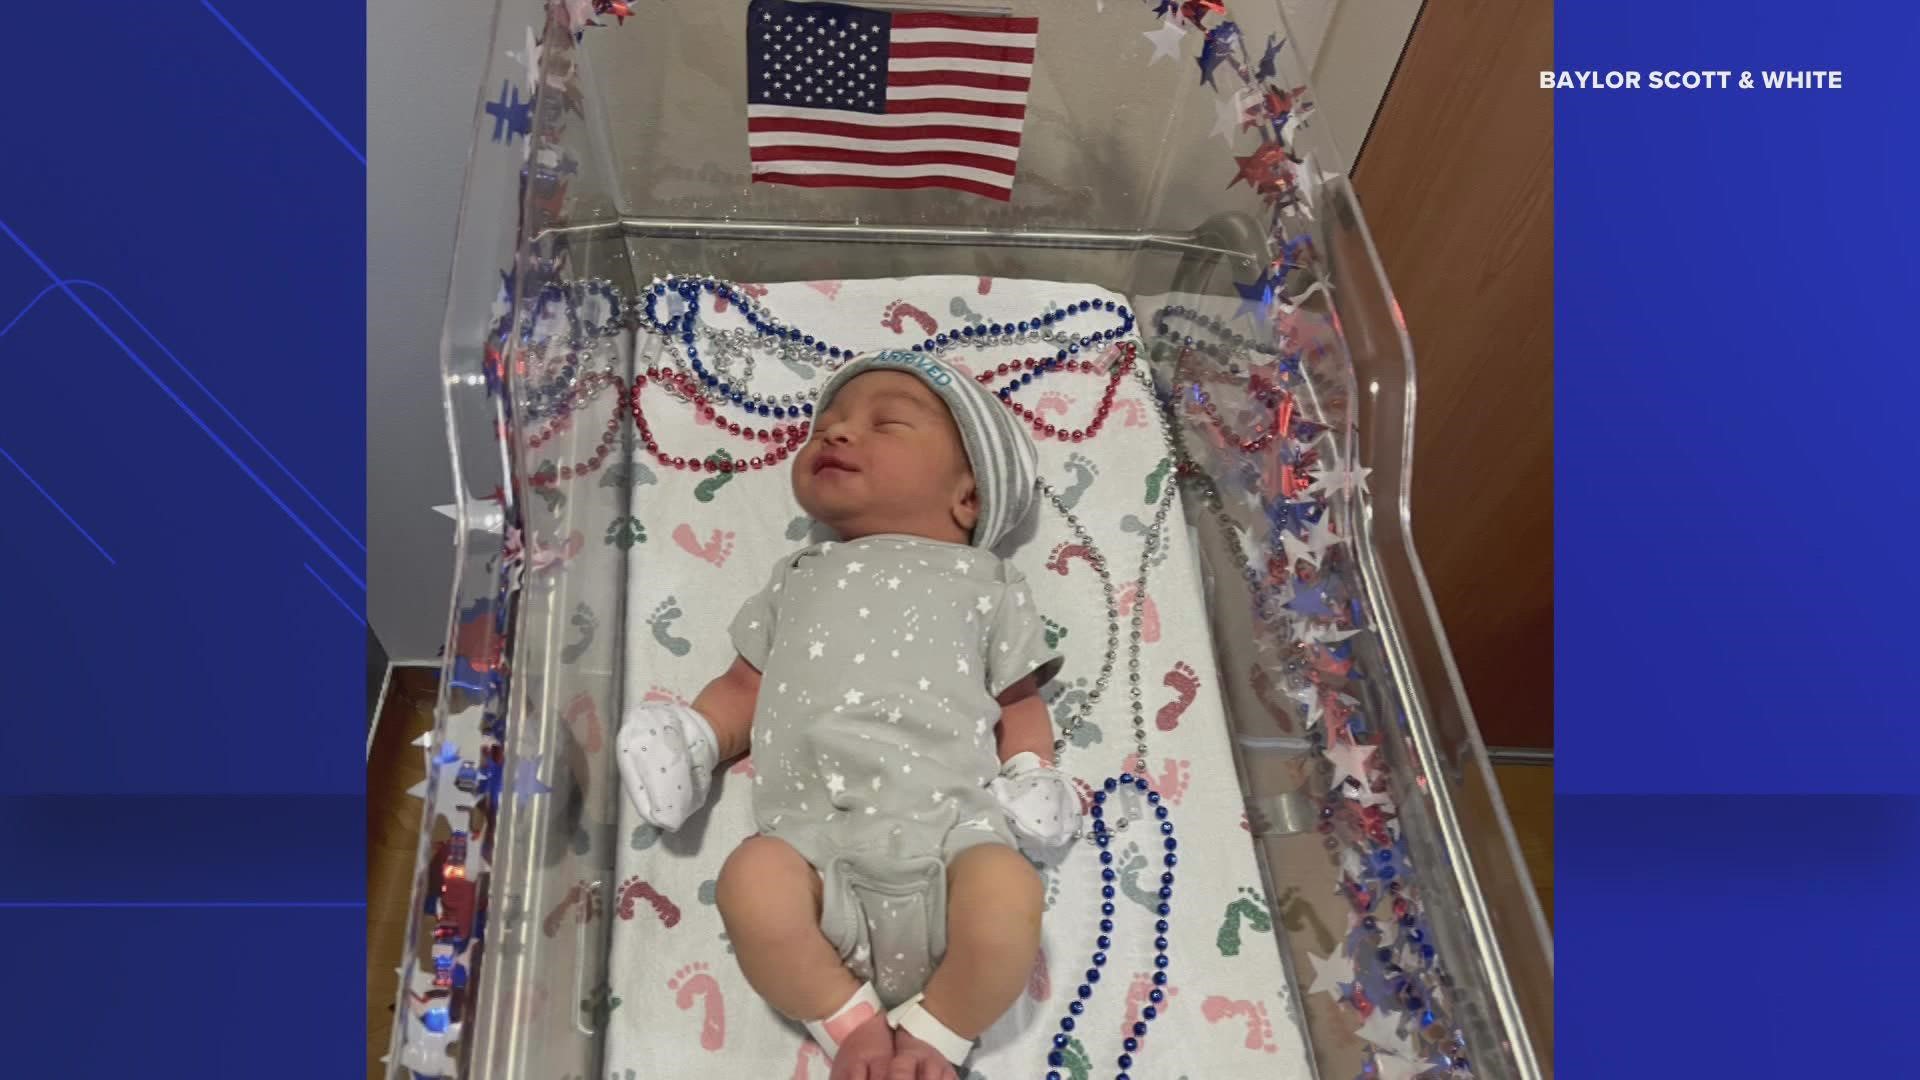 These 12 newborns are "showing off their red, white and blue and are proud to be Born in the USA."